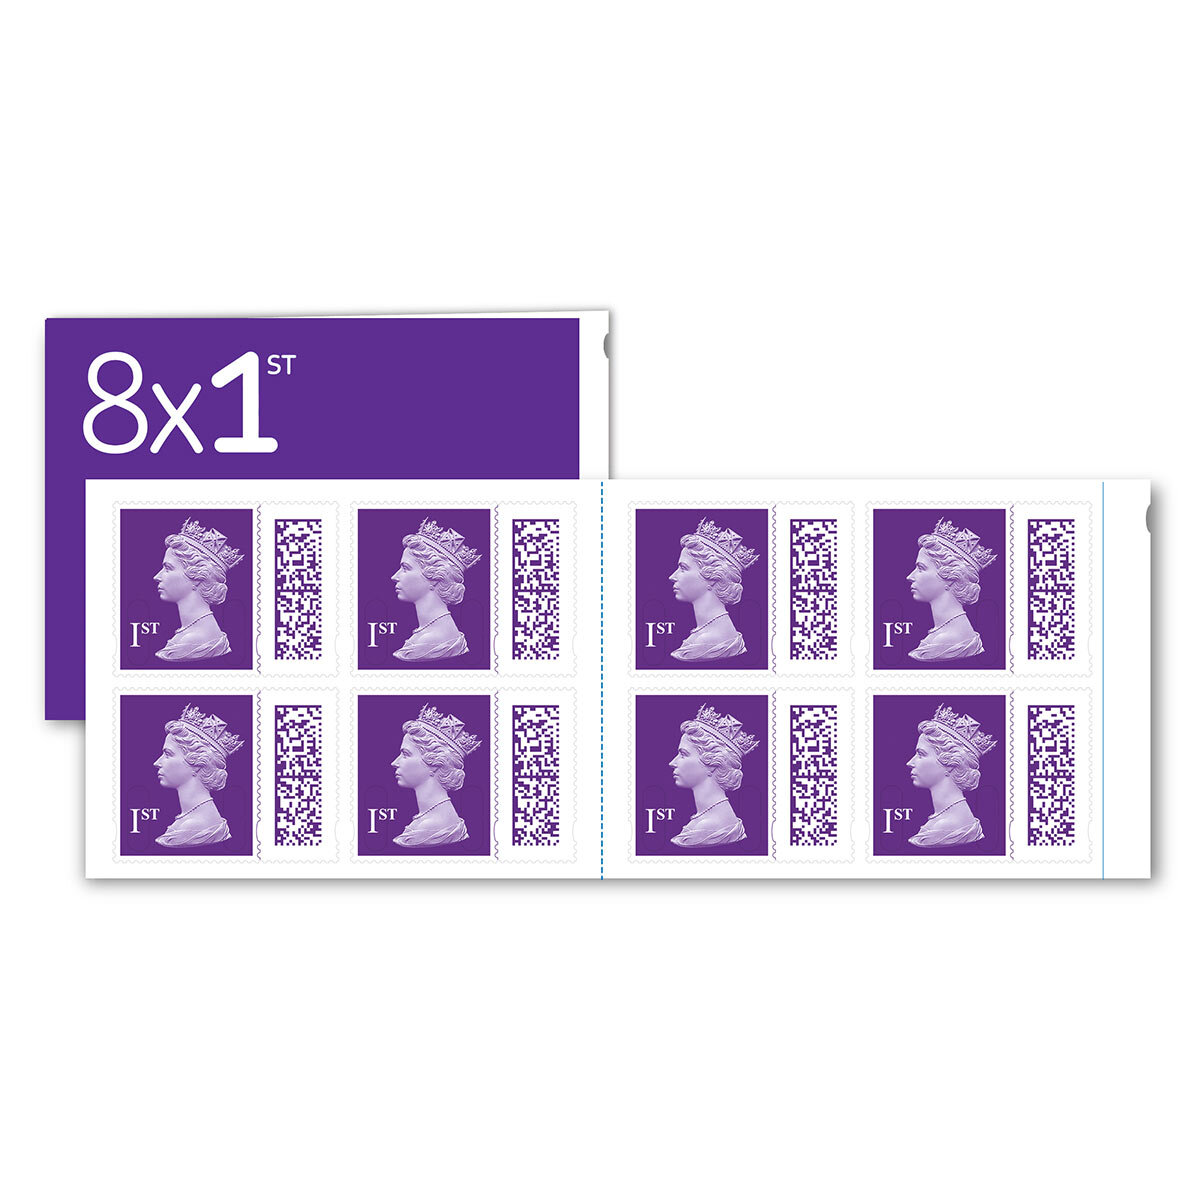 Buy Royal Mail 1st Class 8x8 Small Stamps Book Image at Costco.co.uk